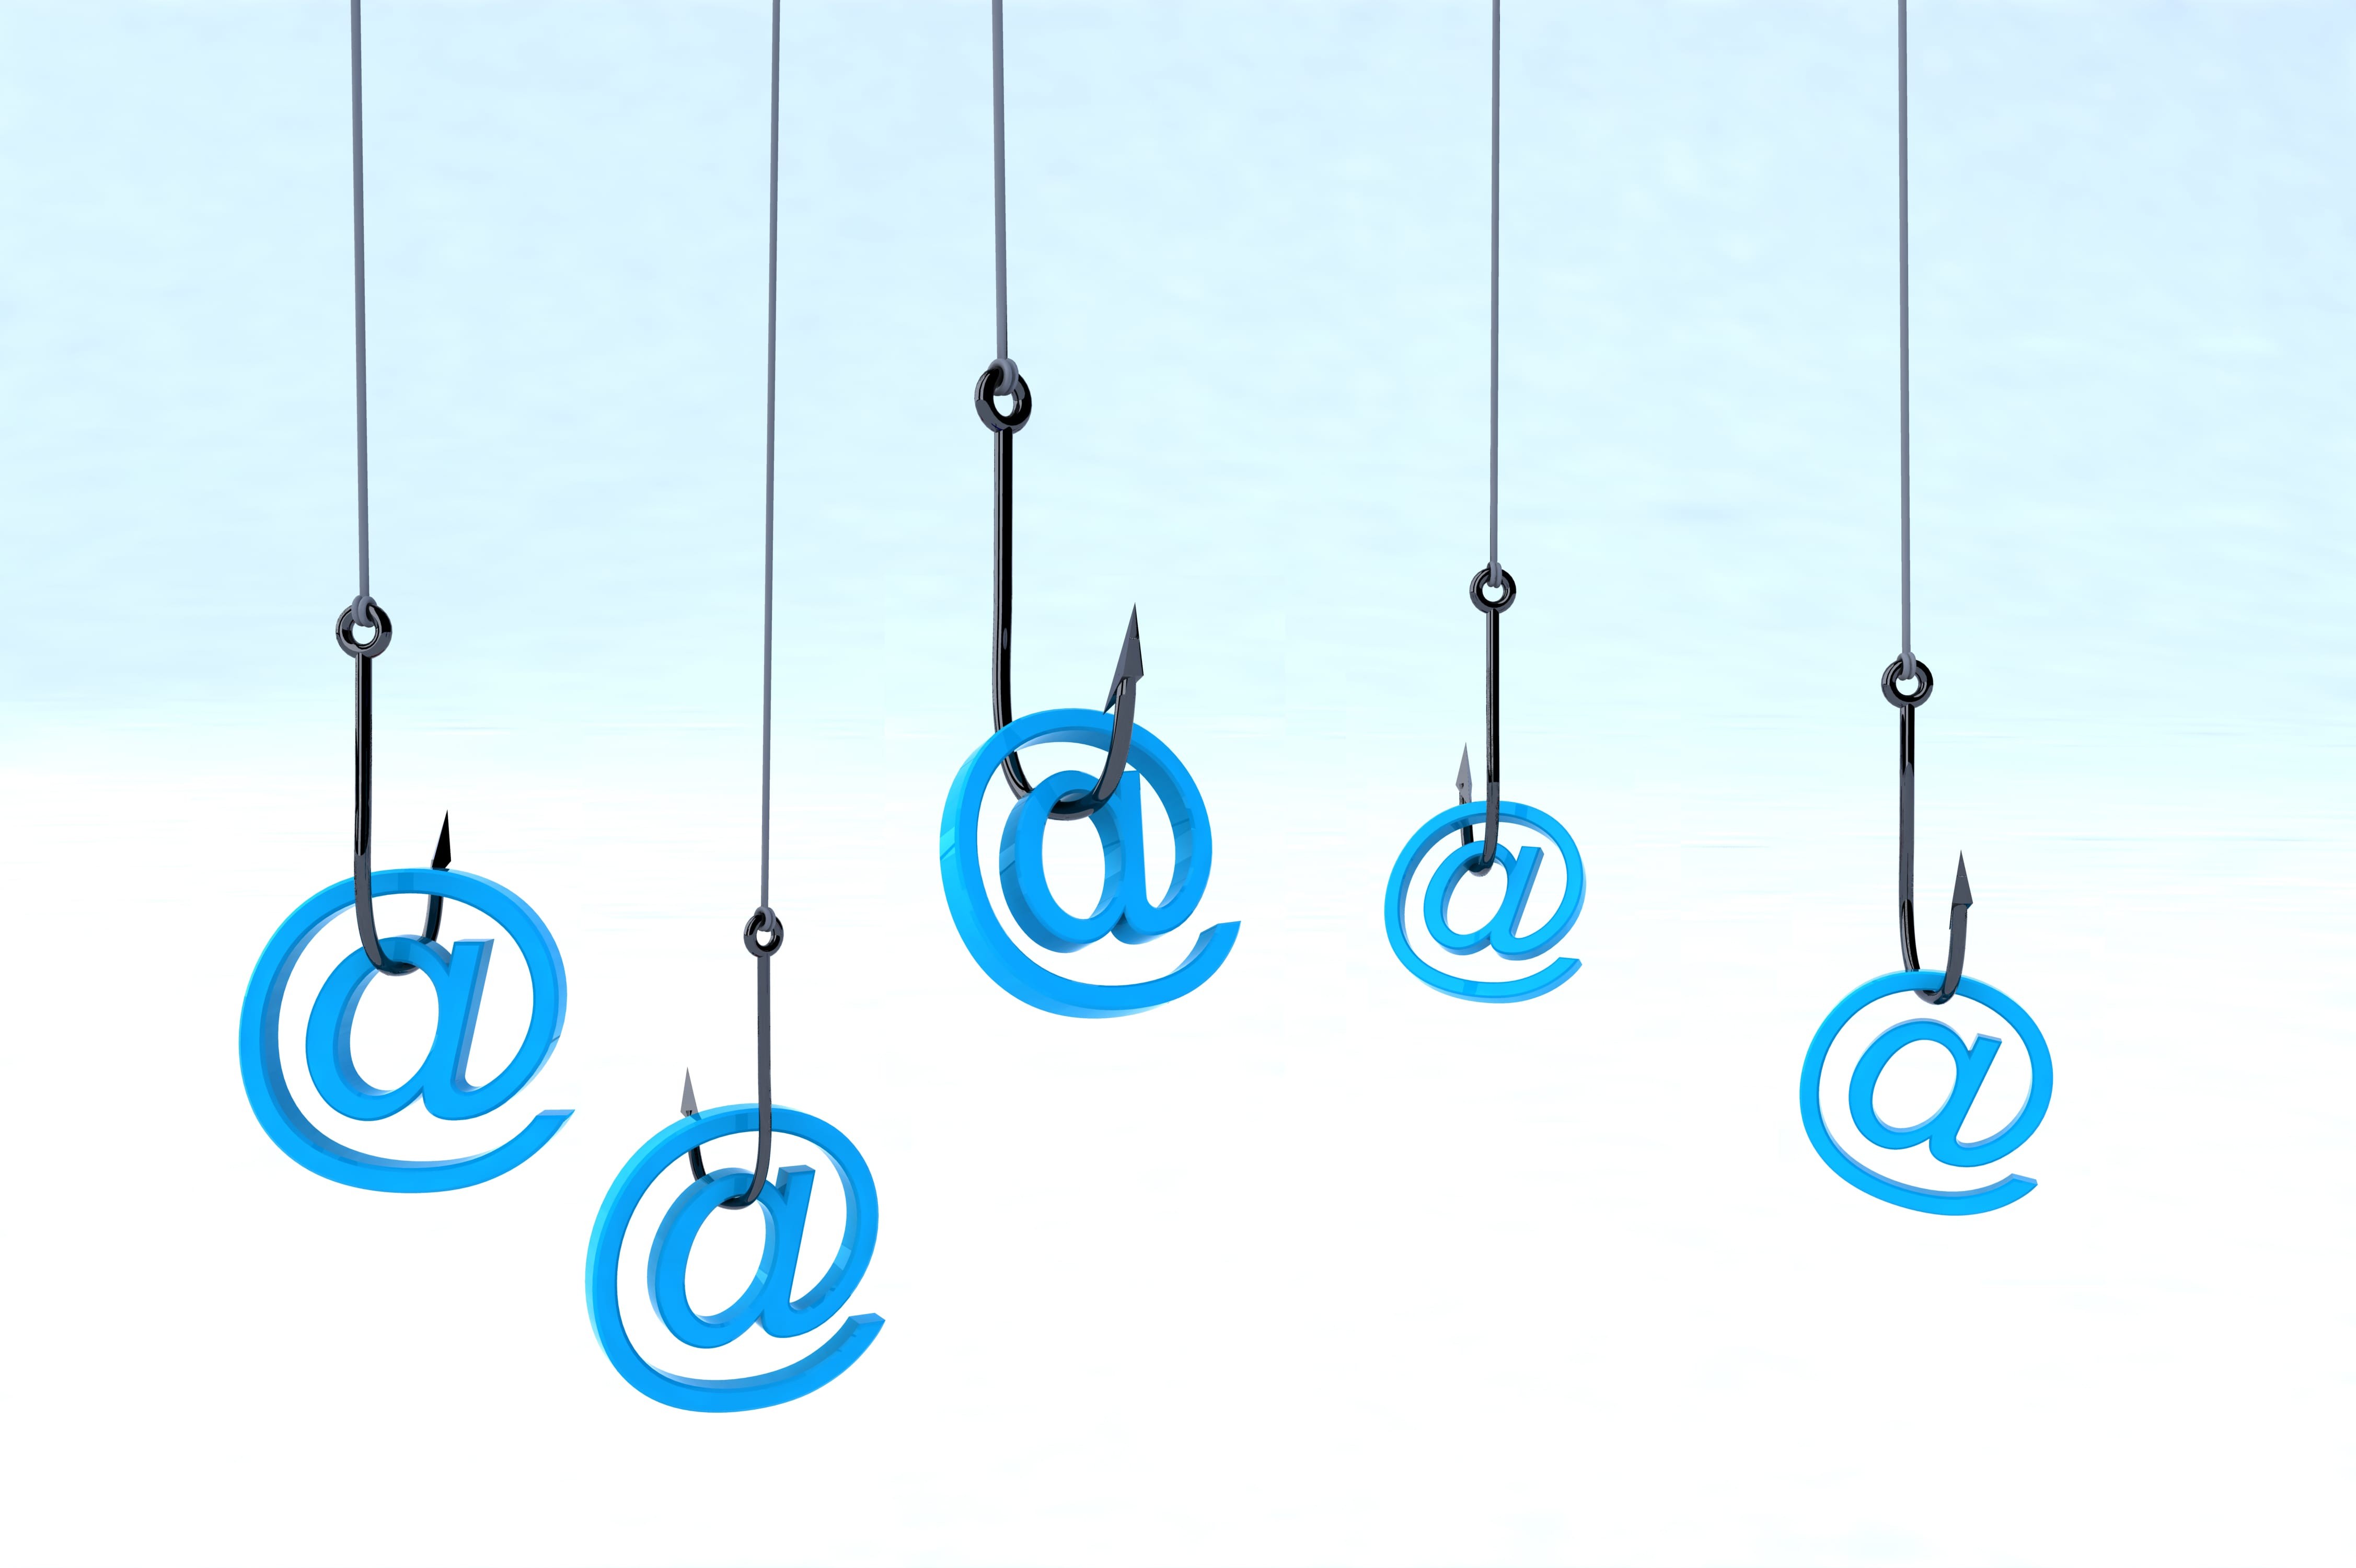 1 in 5 employees fall for phishing emails even after a security training